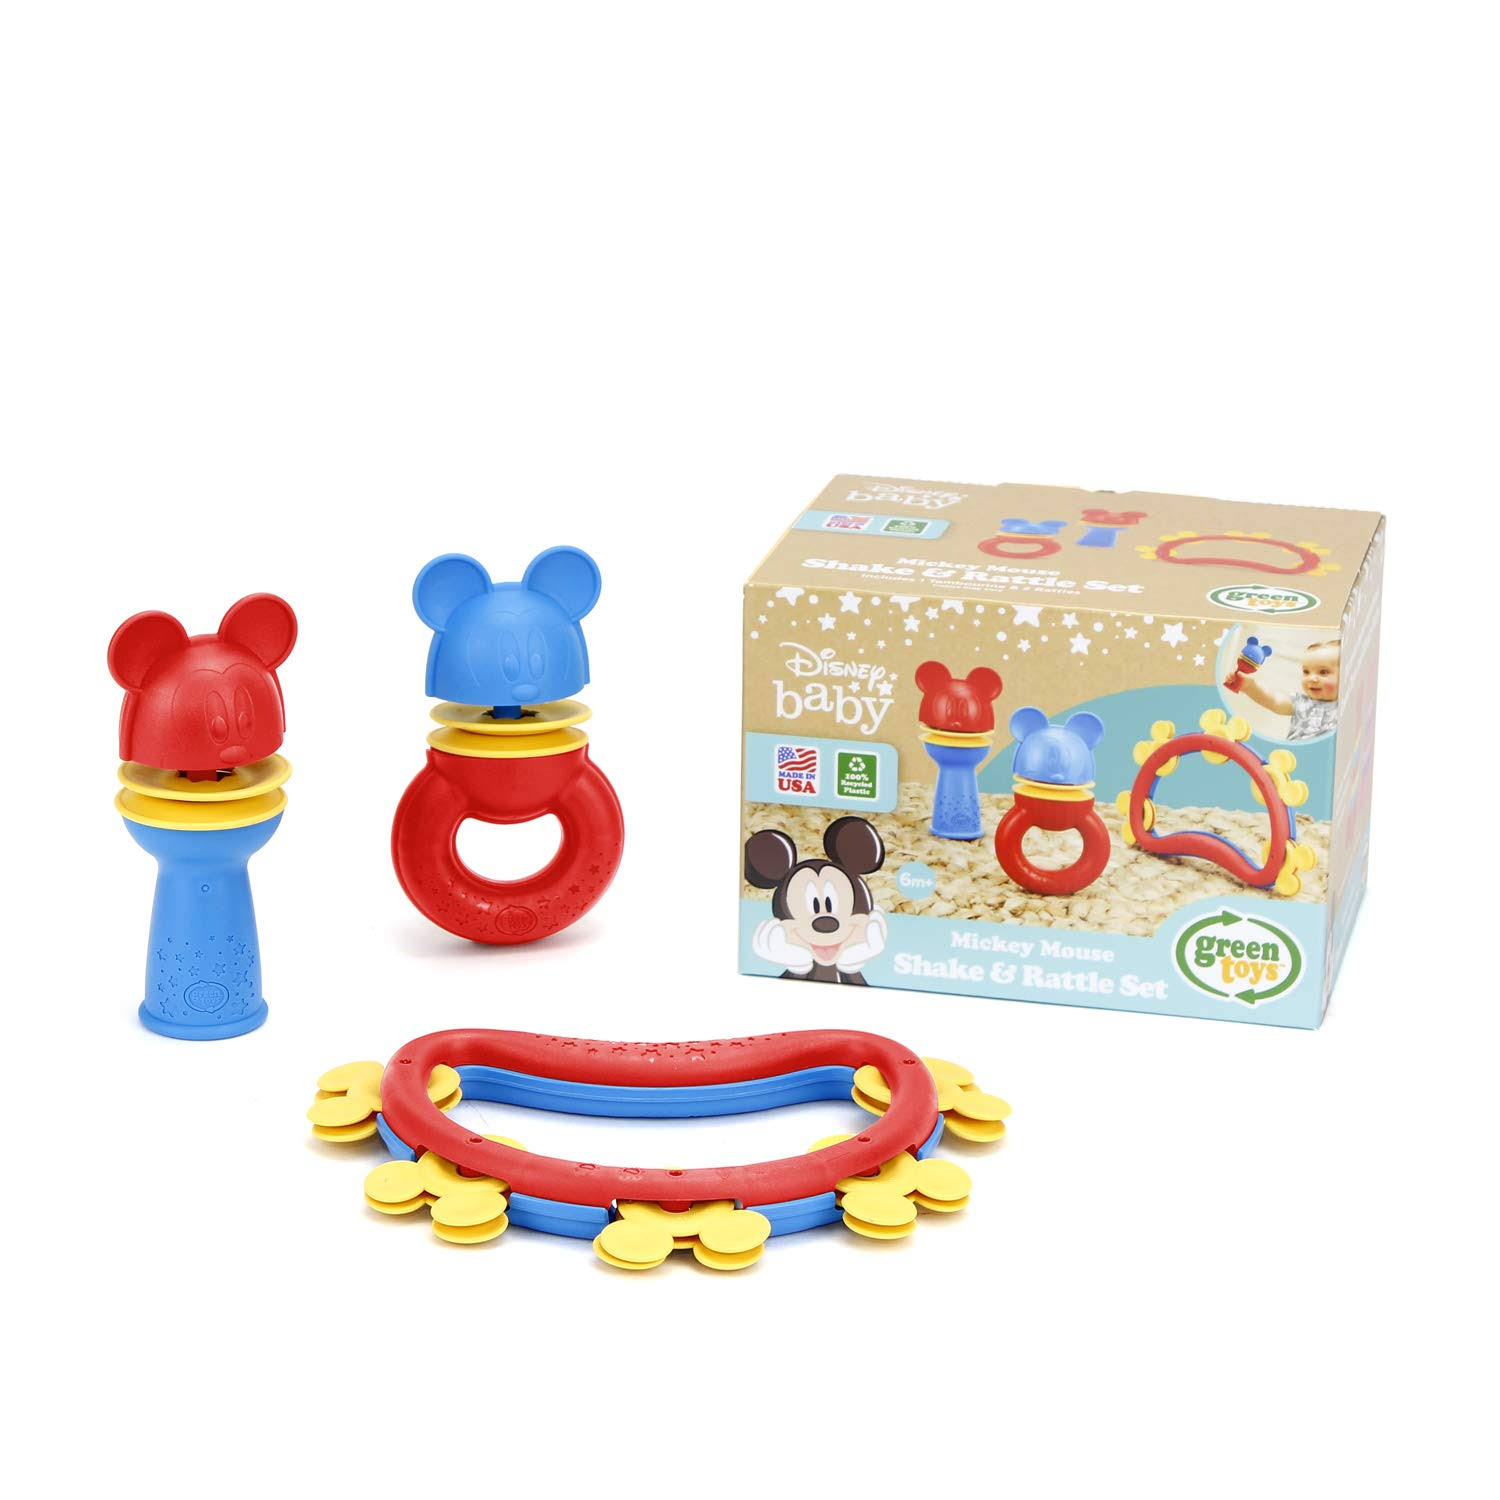 Green Toys Disney Baby Exclusive - Mickey Mouse Shake & Rattle Set,